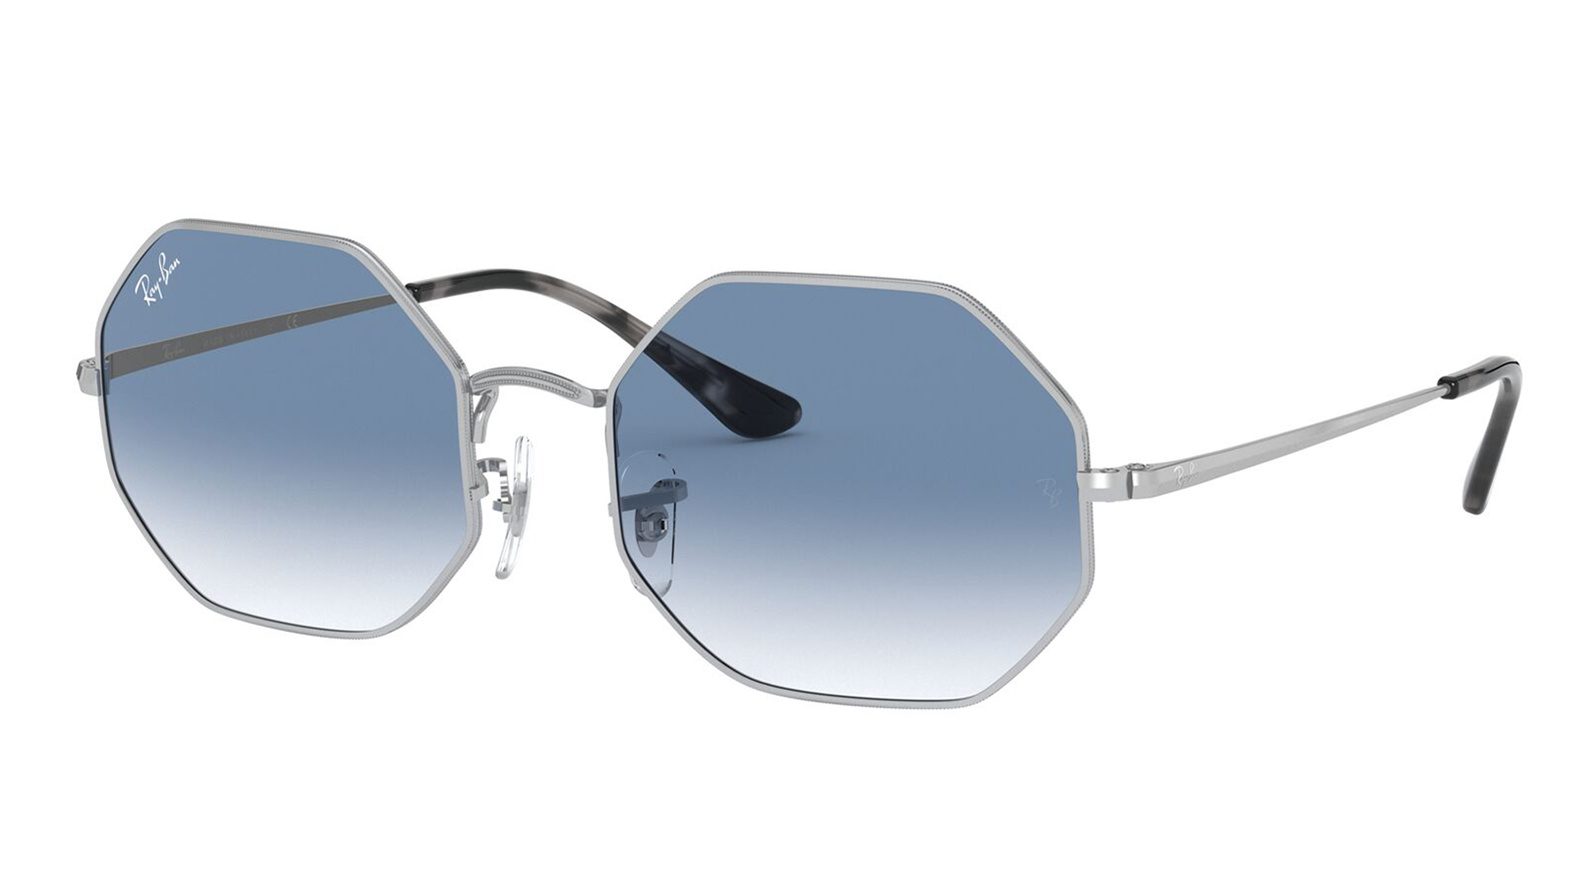 Ray-Ban Octagon RB 1972 91493F